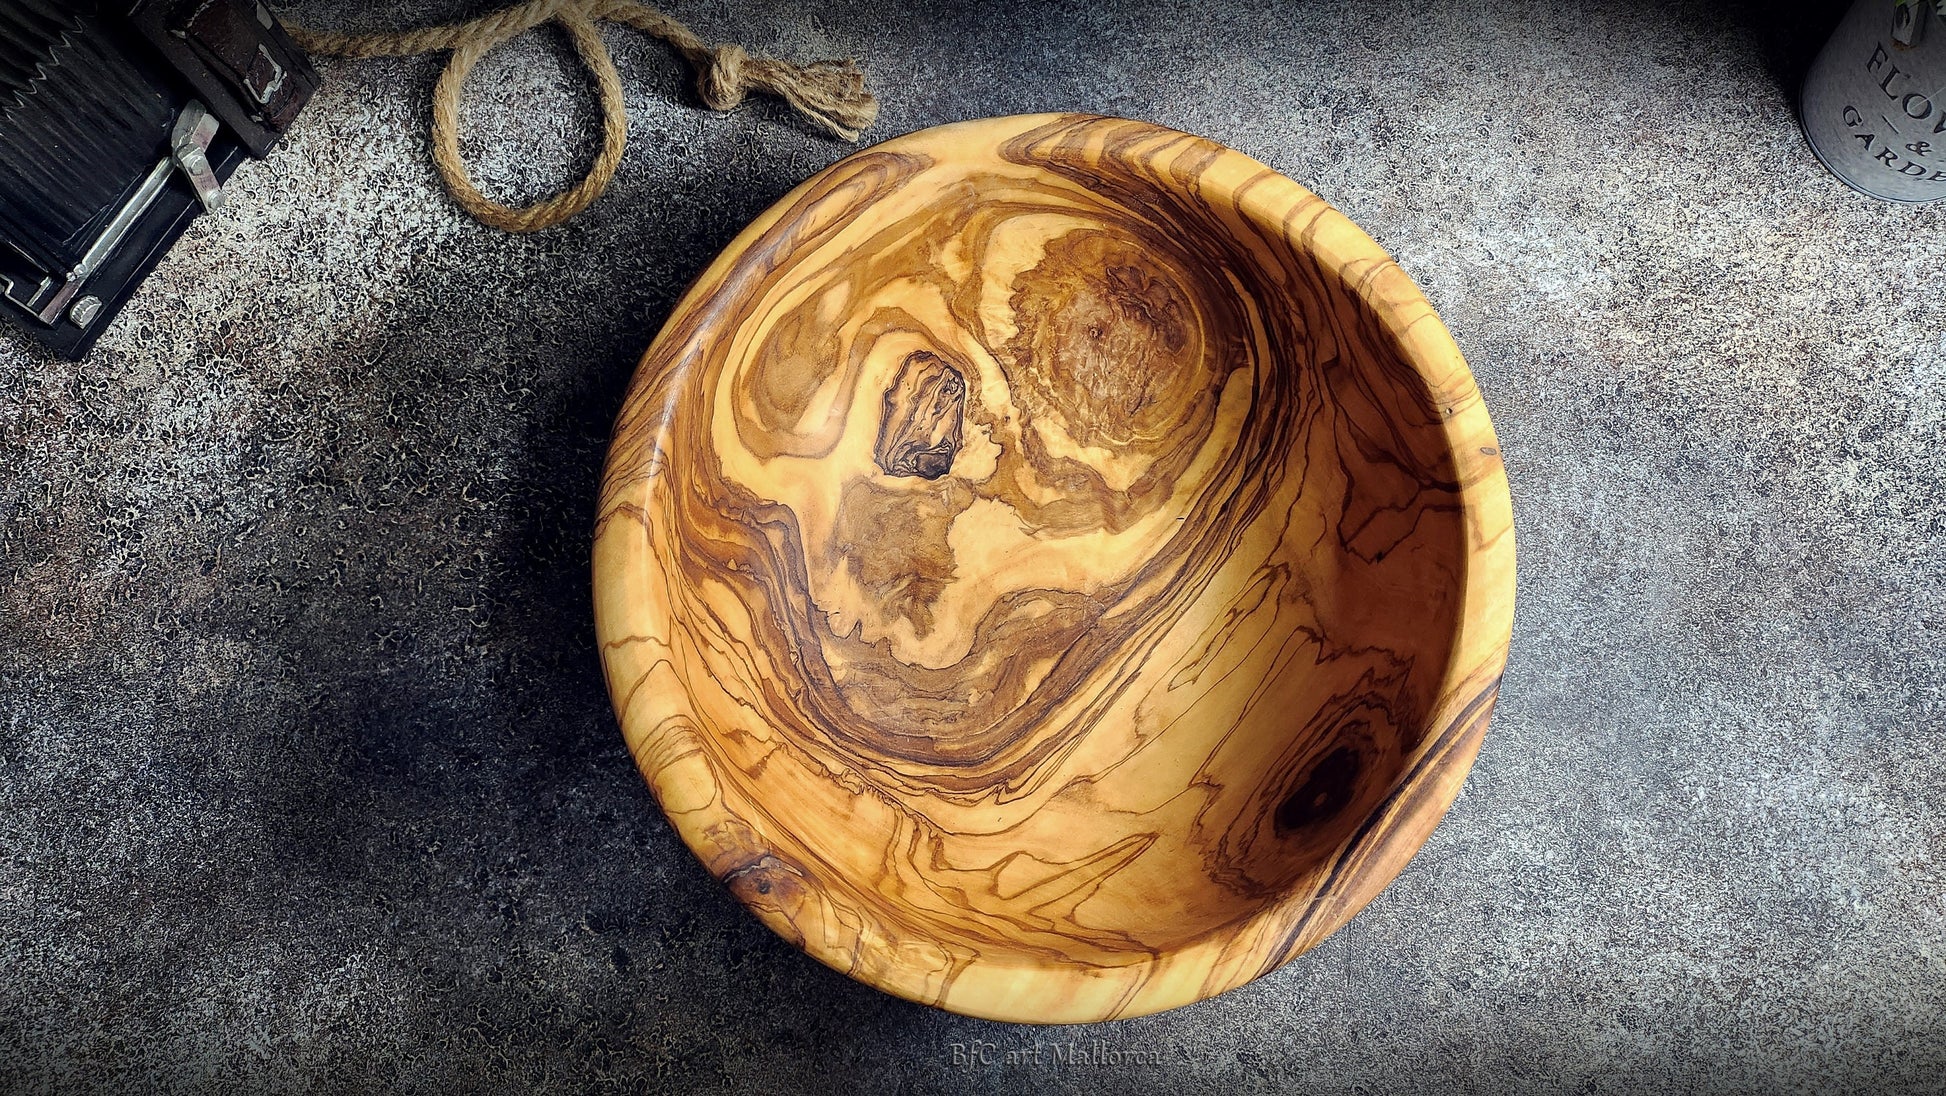 Salad Bowl Olive wood Personalized, Handcrafted bowl solid wood fruit bowl, Decorative bowl for centerpiece